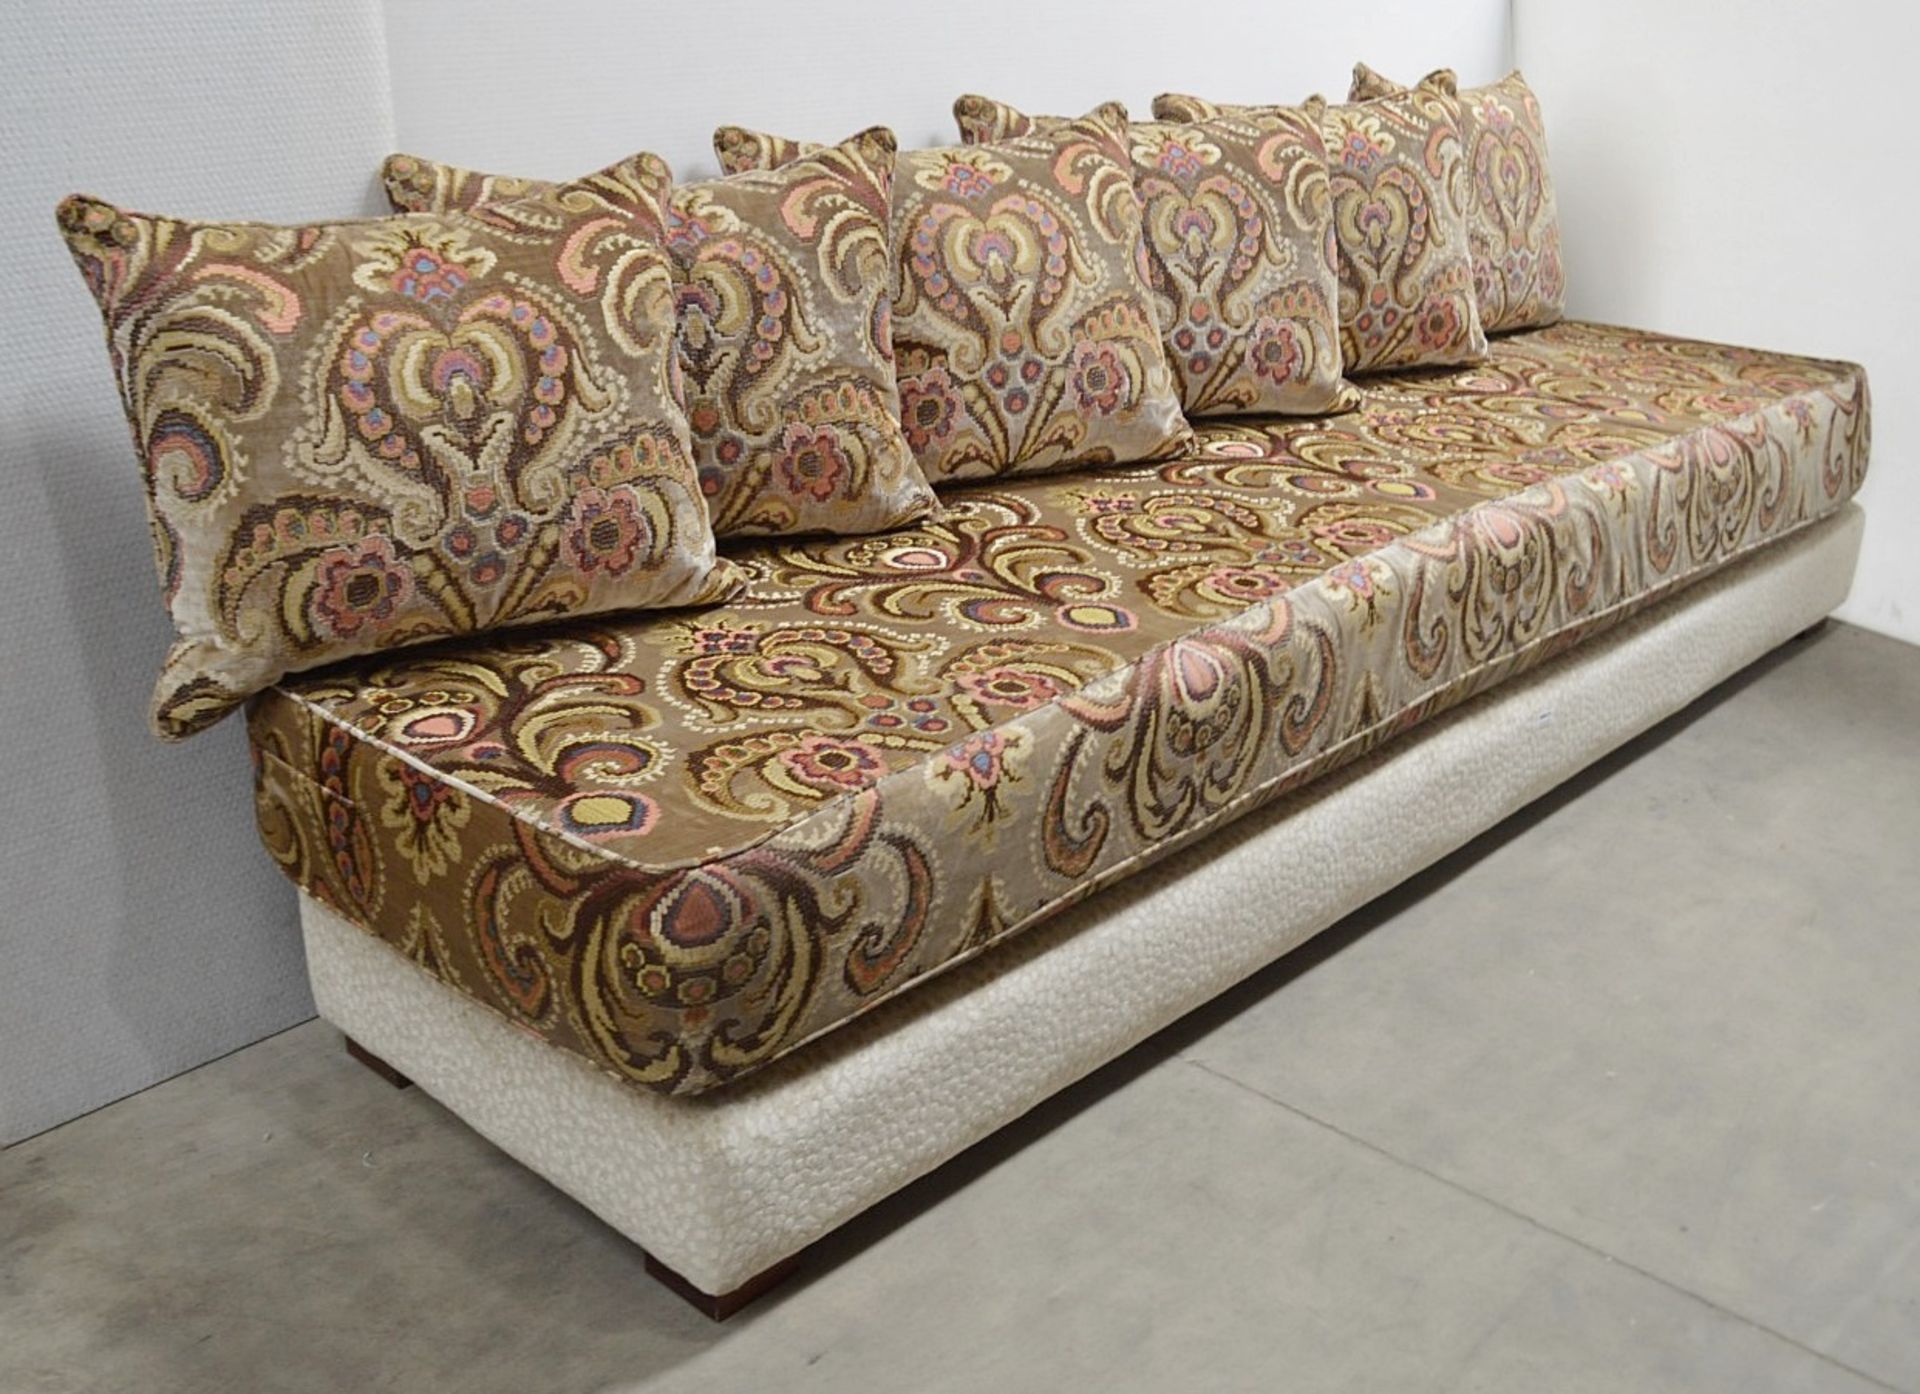 1 x Impressive 9ft Long Moroccan-style Seating Bench With Matching Footstool And 6 x Scatter